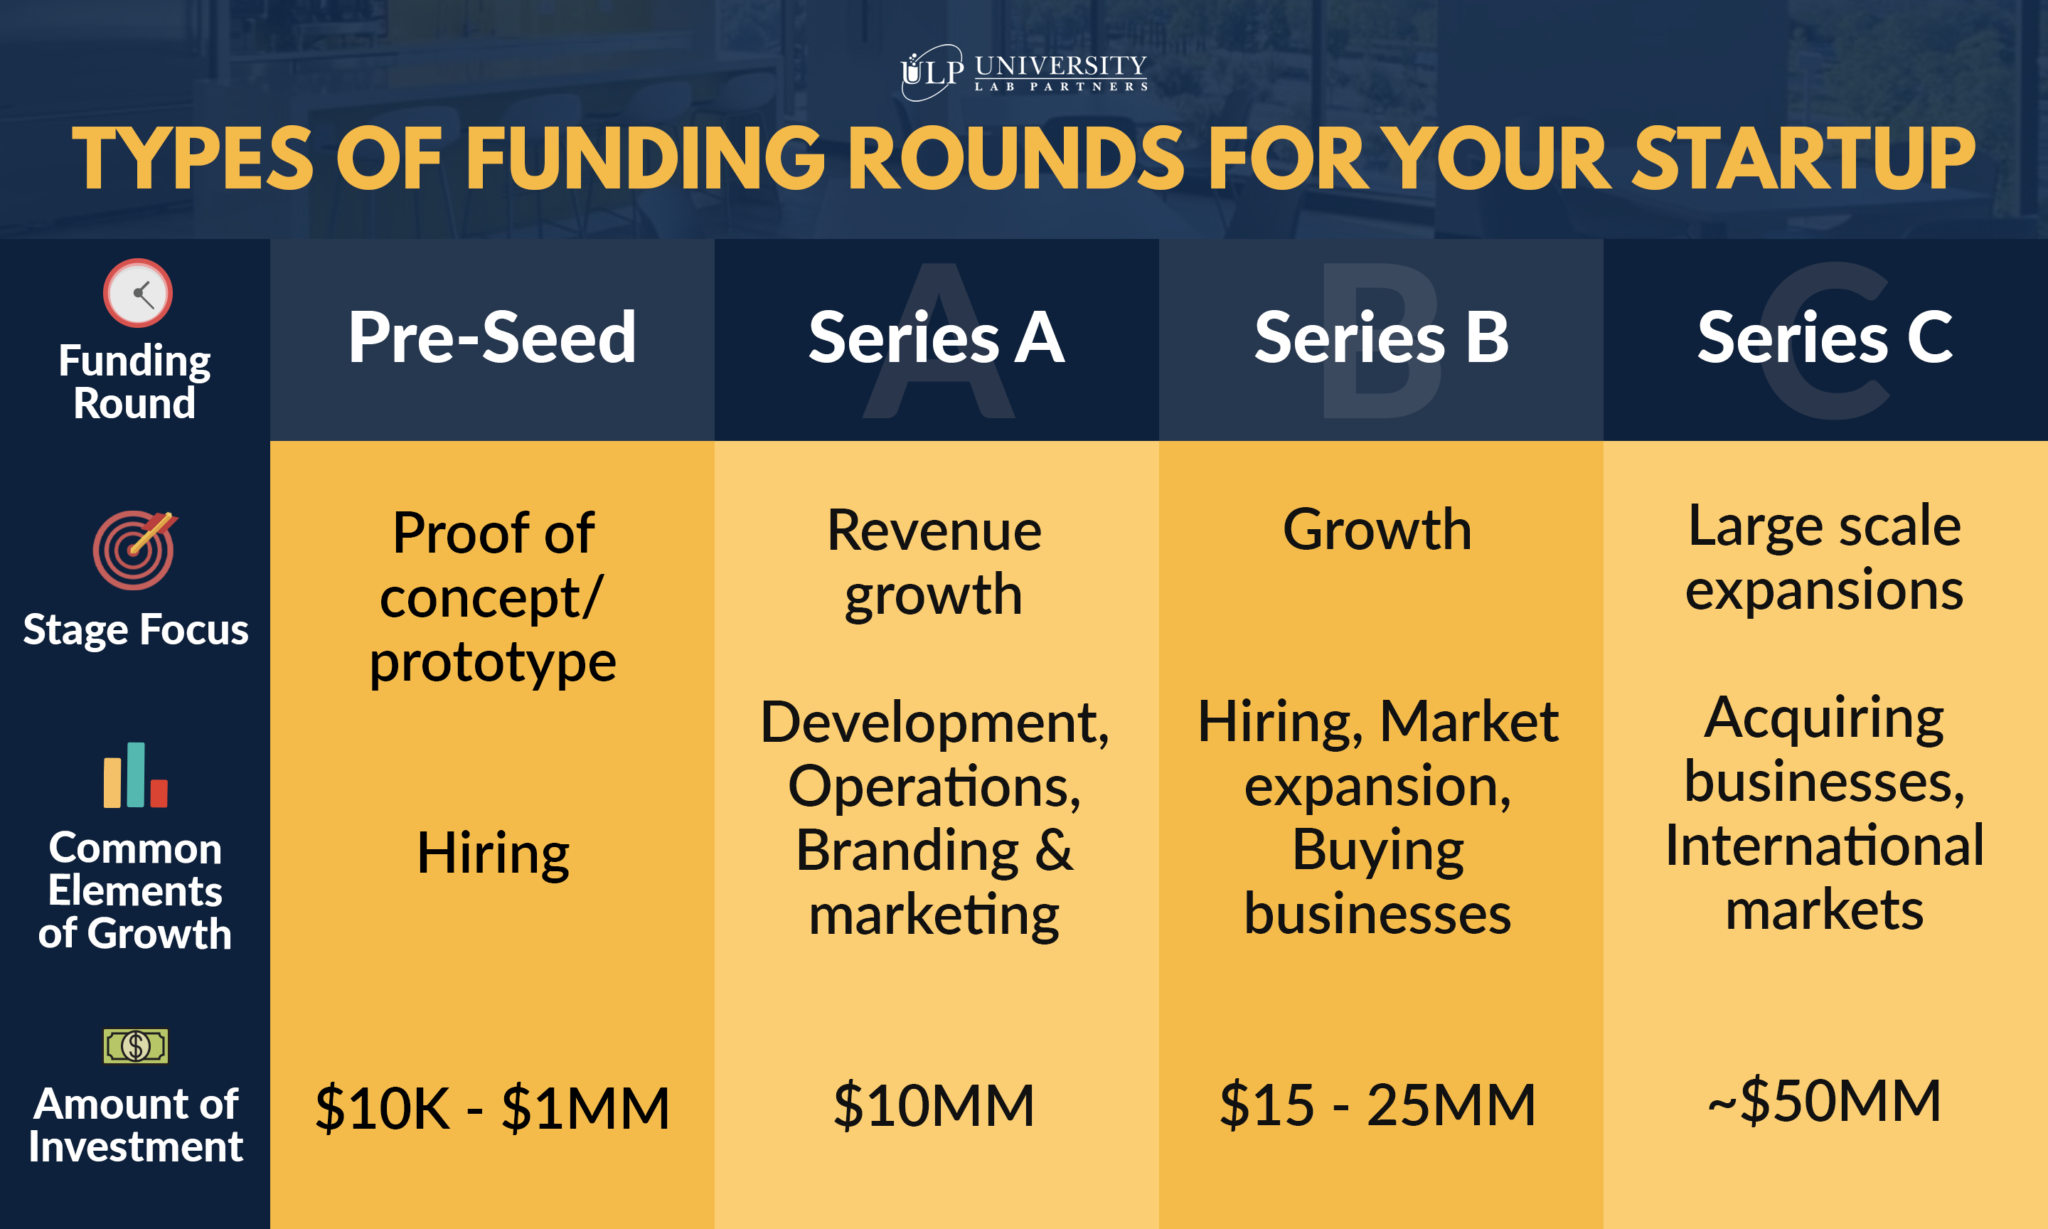 "Series A, B, C Funding: A Quick Overview"